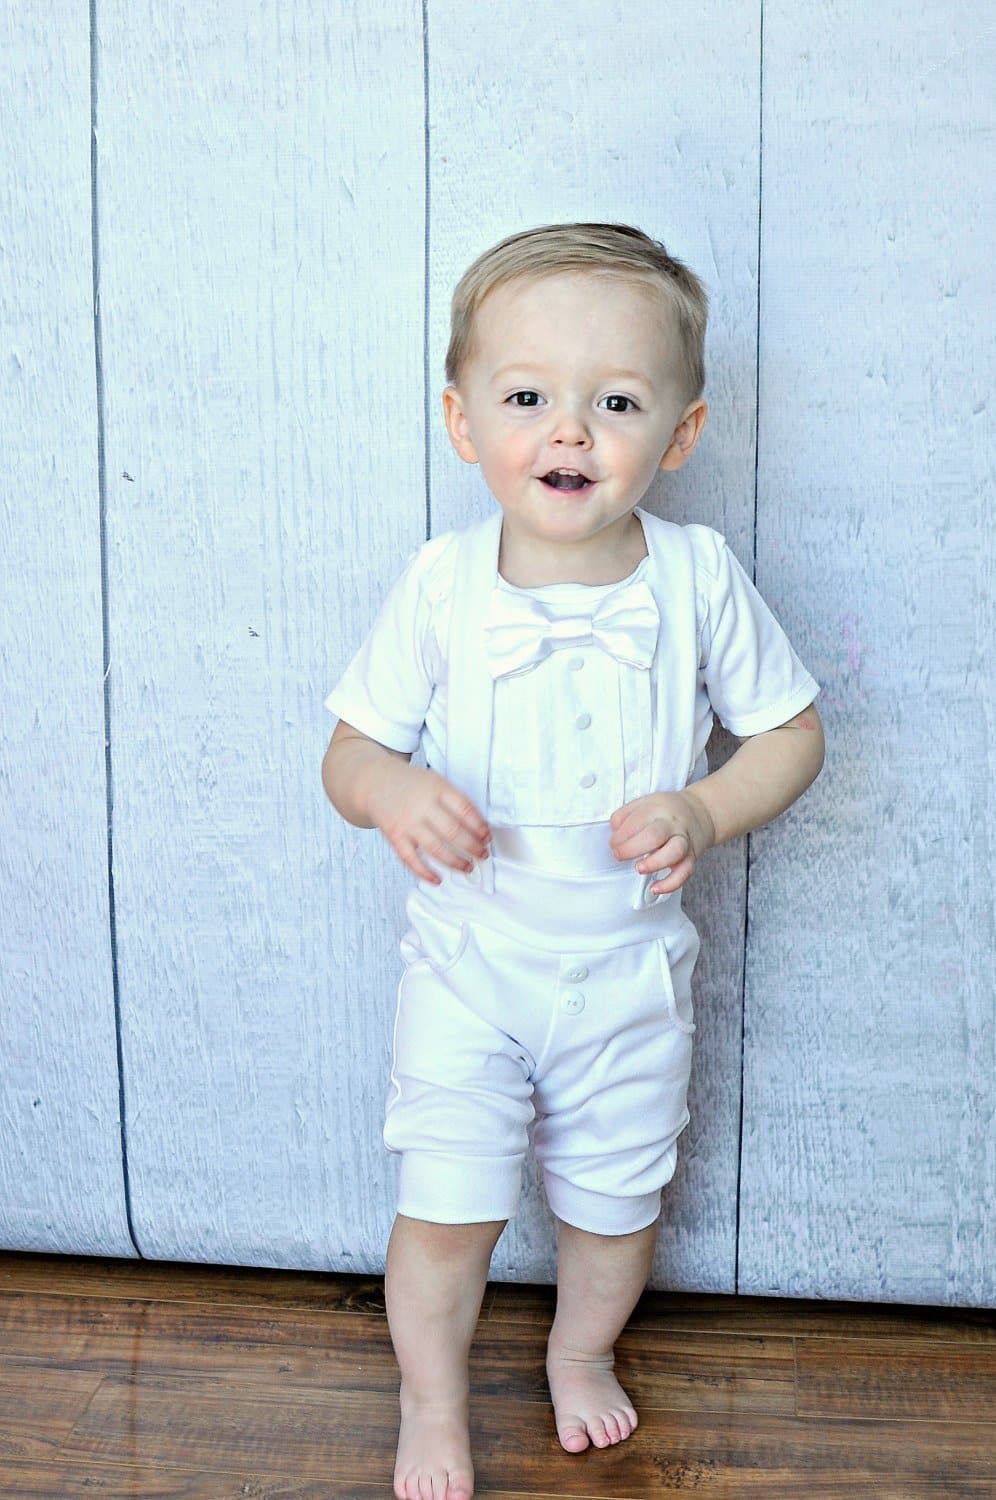 Christening Suit Blue White Check Baby Boys 4 Piece Christening Outfit 